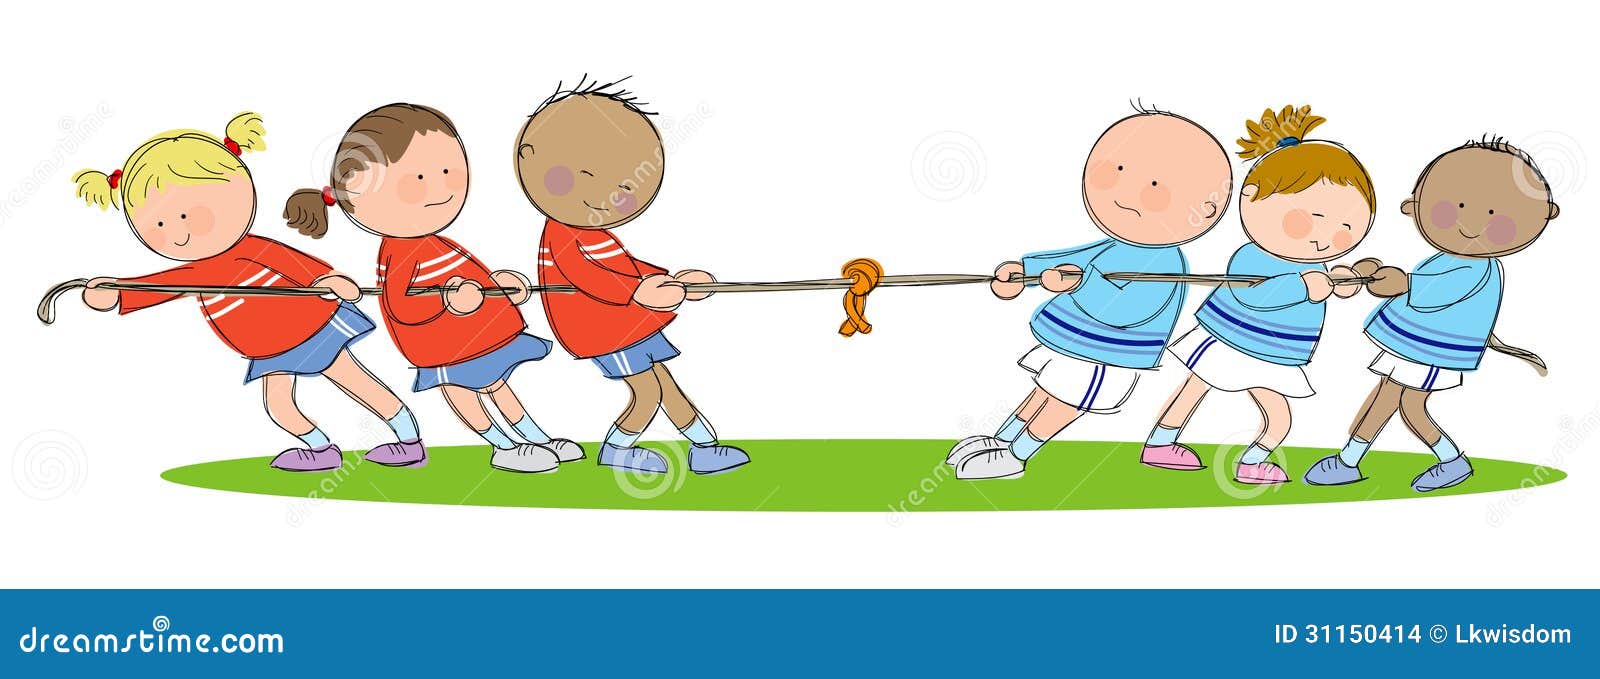 clipart tug of war rope - photo #20